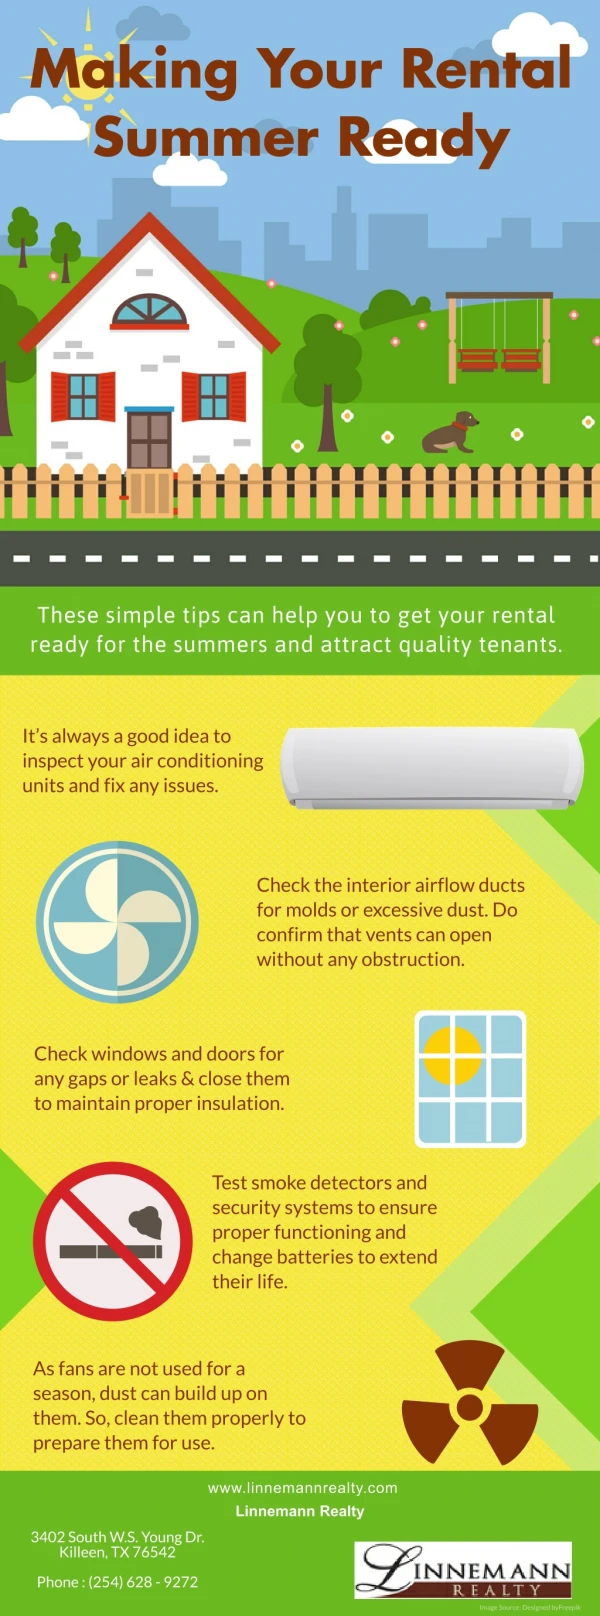 Making Your Rental Summer Ready